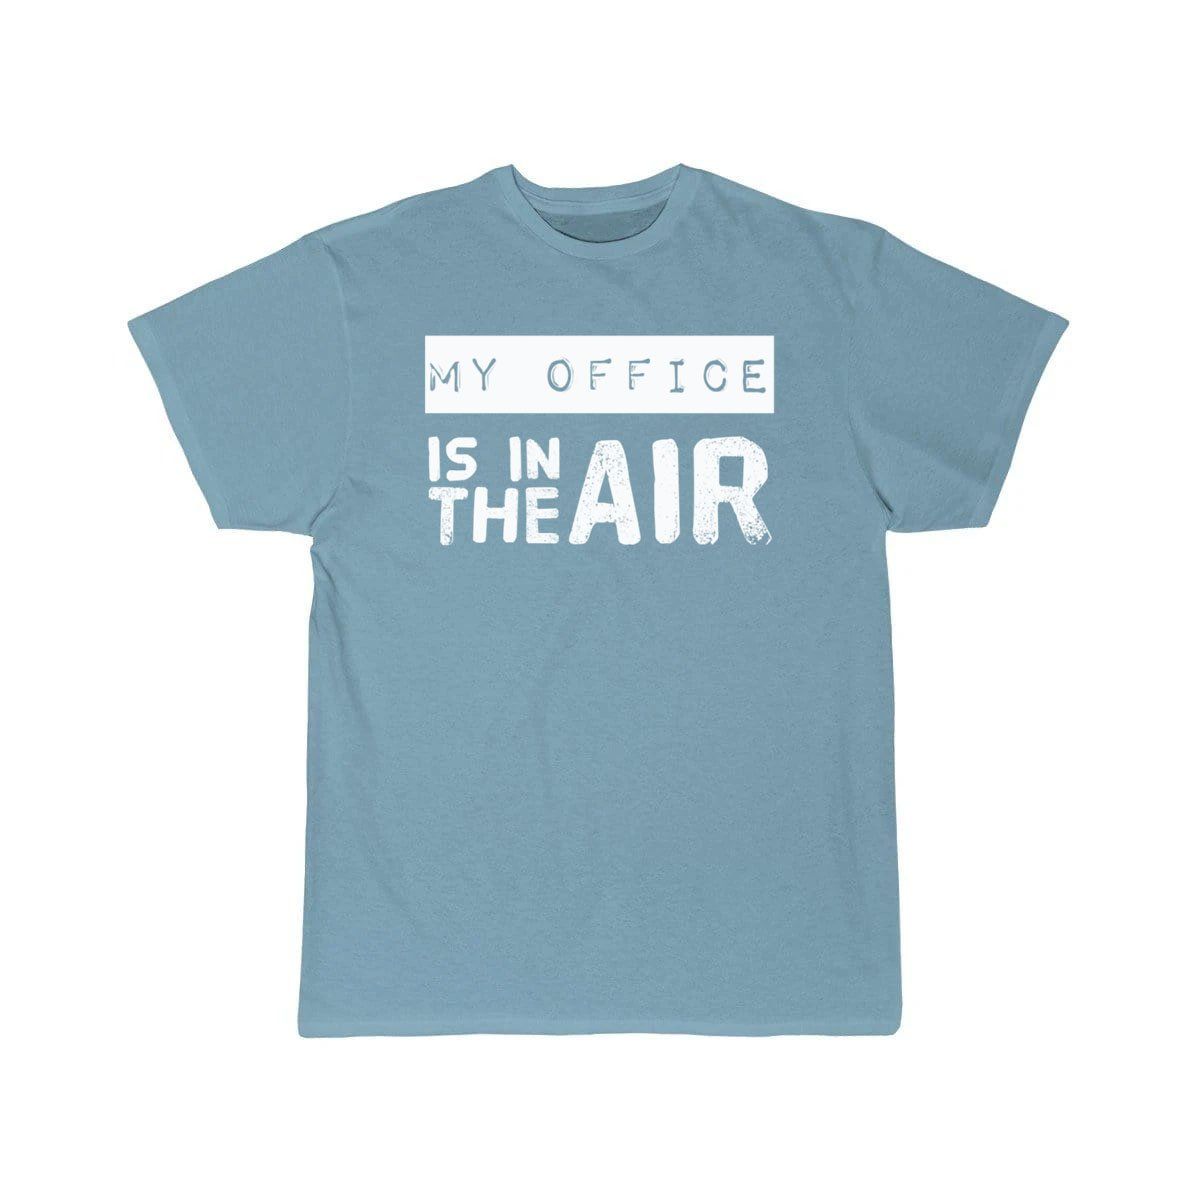 My office is in the air T-SHIRT THE AV8R